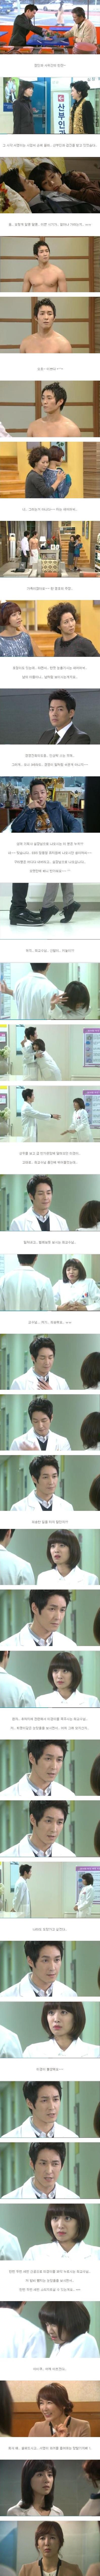 [Spoiler] Added episode 17 and 18 captures for the Korean drama 'My Daughter Seo-yeong'